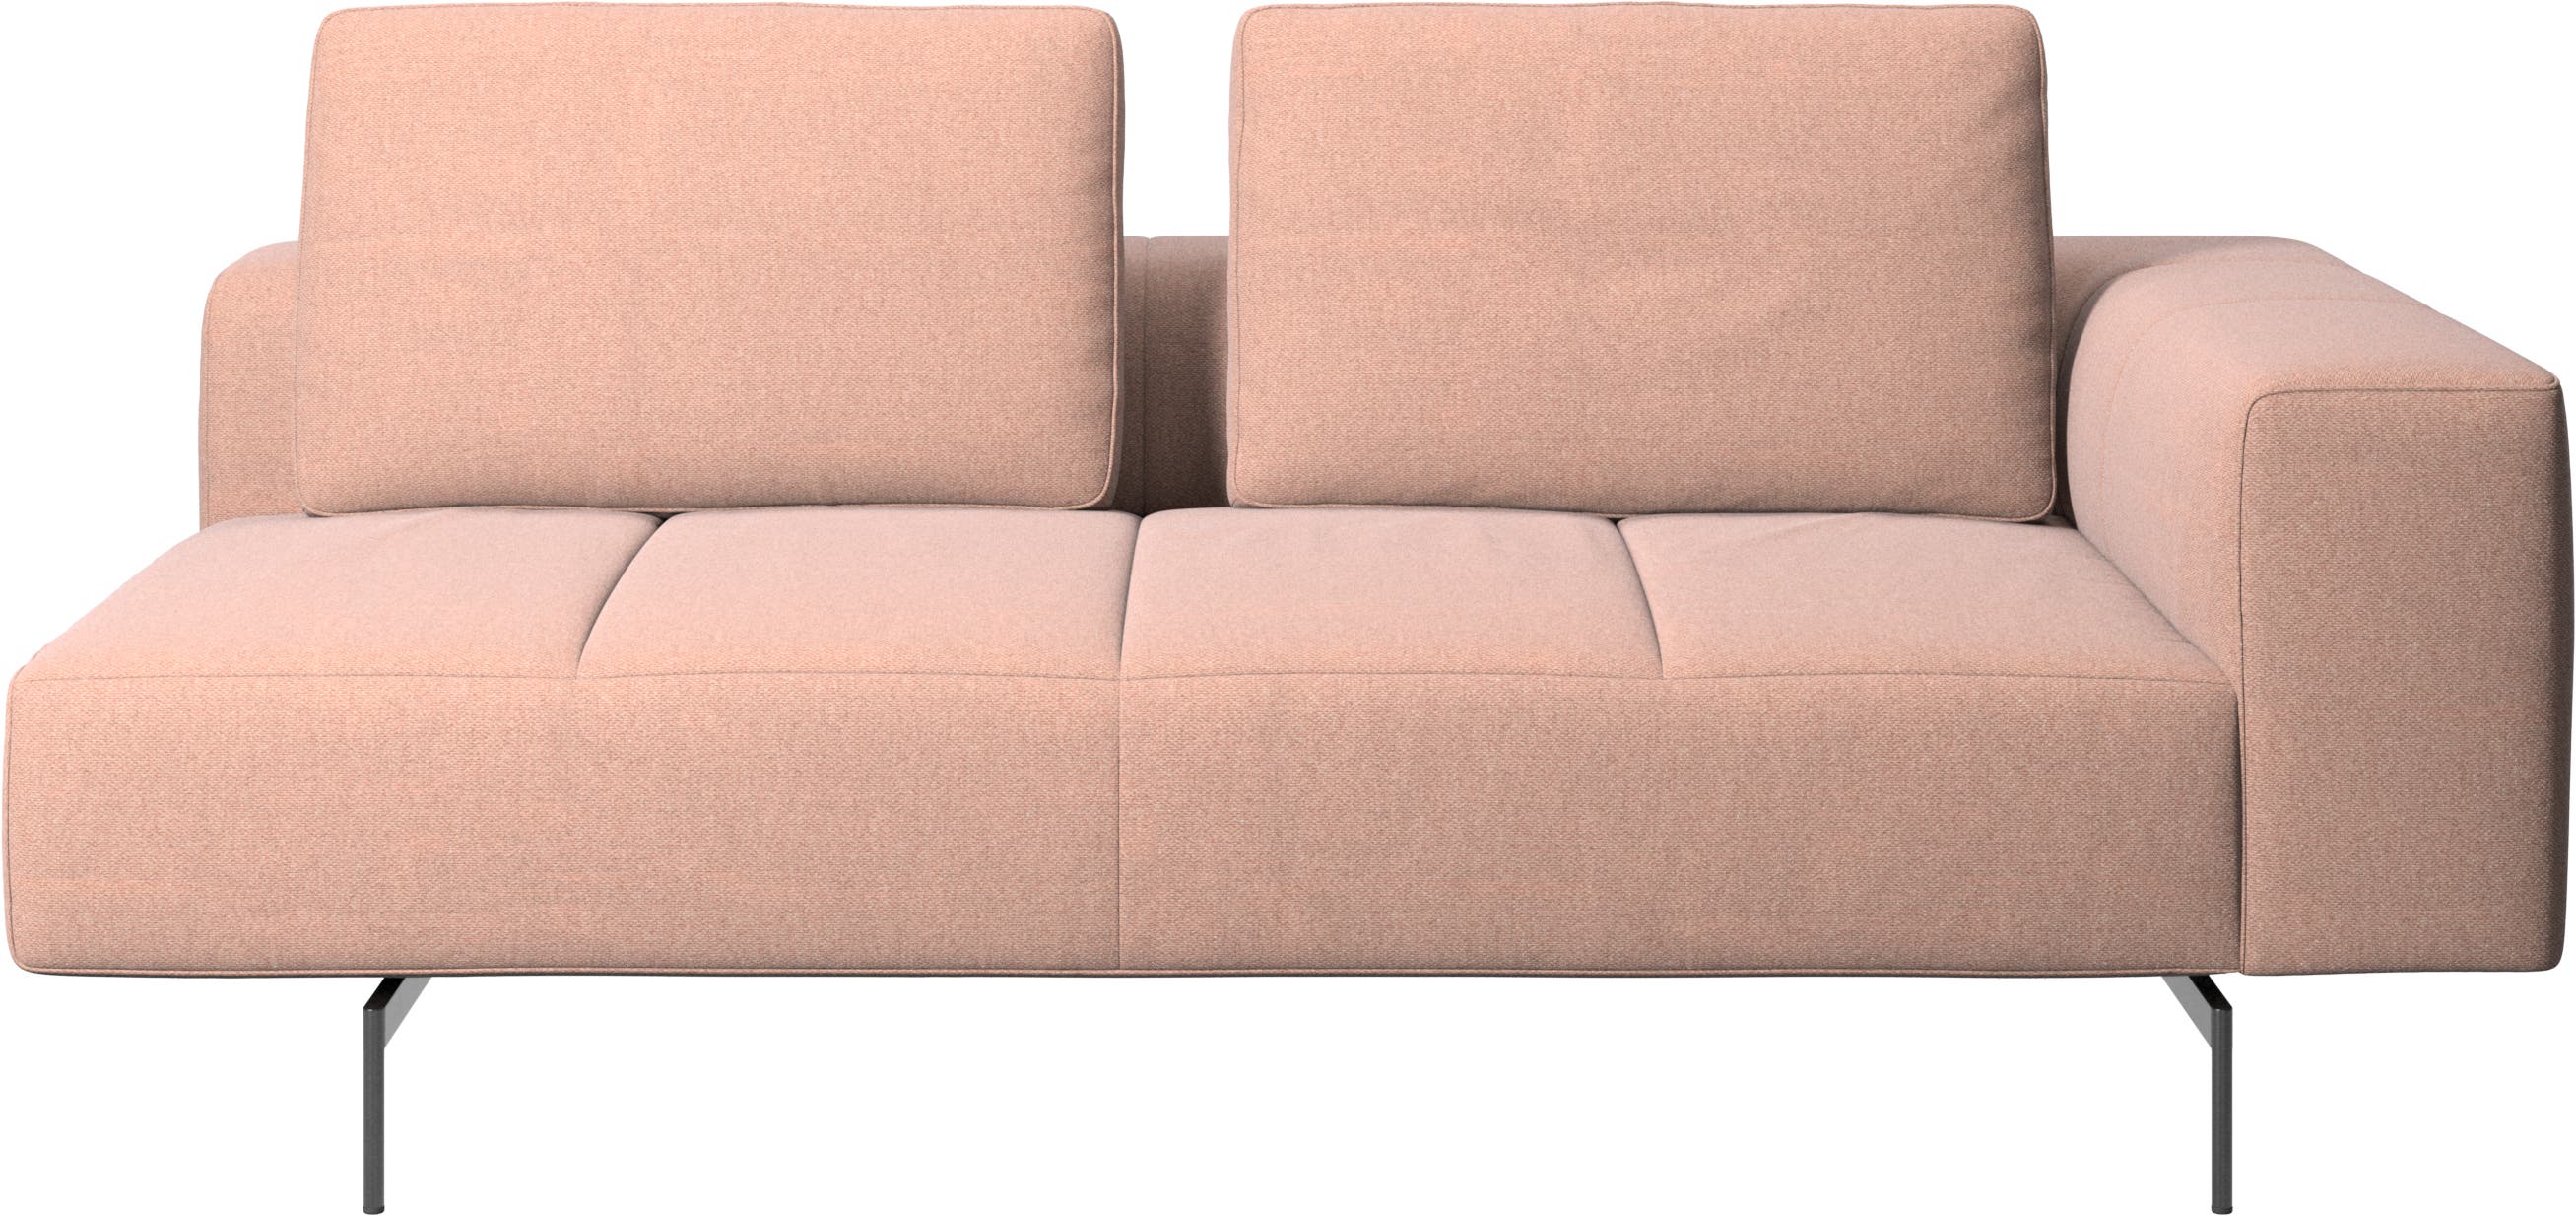 Amsterdam 2.5 seating module, armrest right